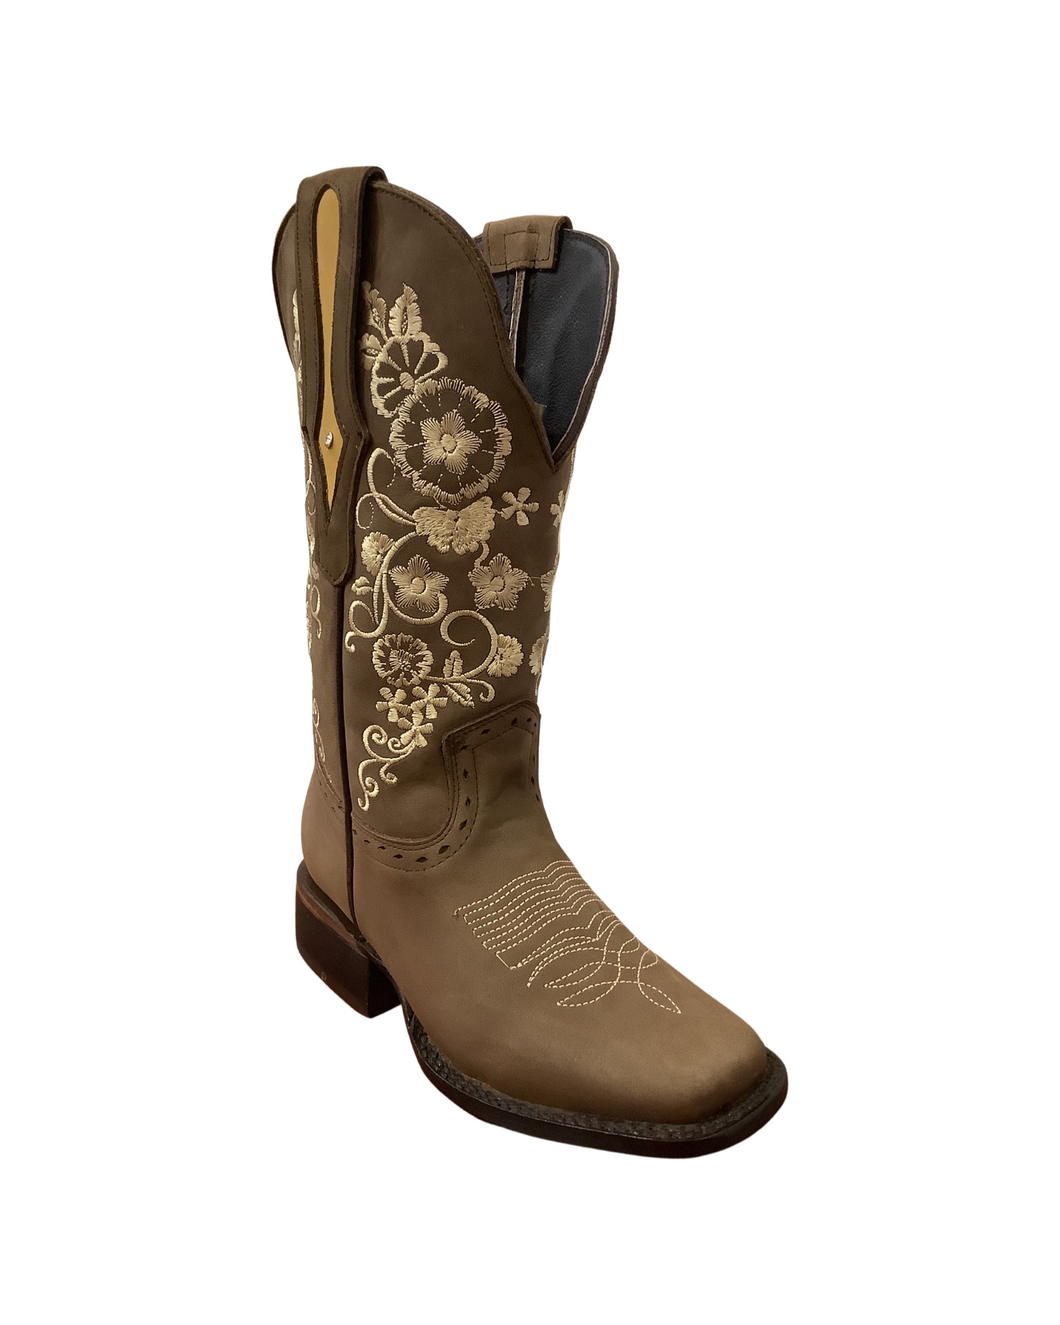 Arles Brown Boots with Flowers